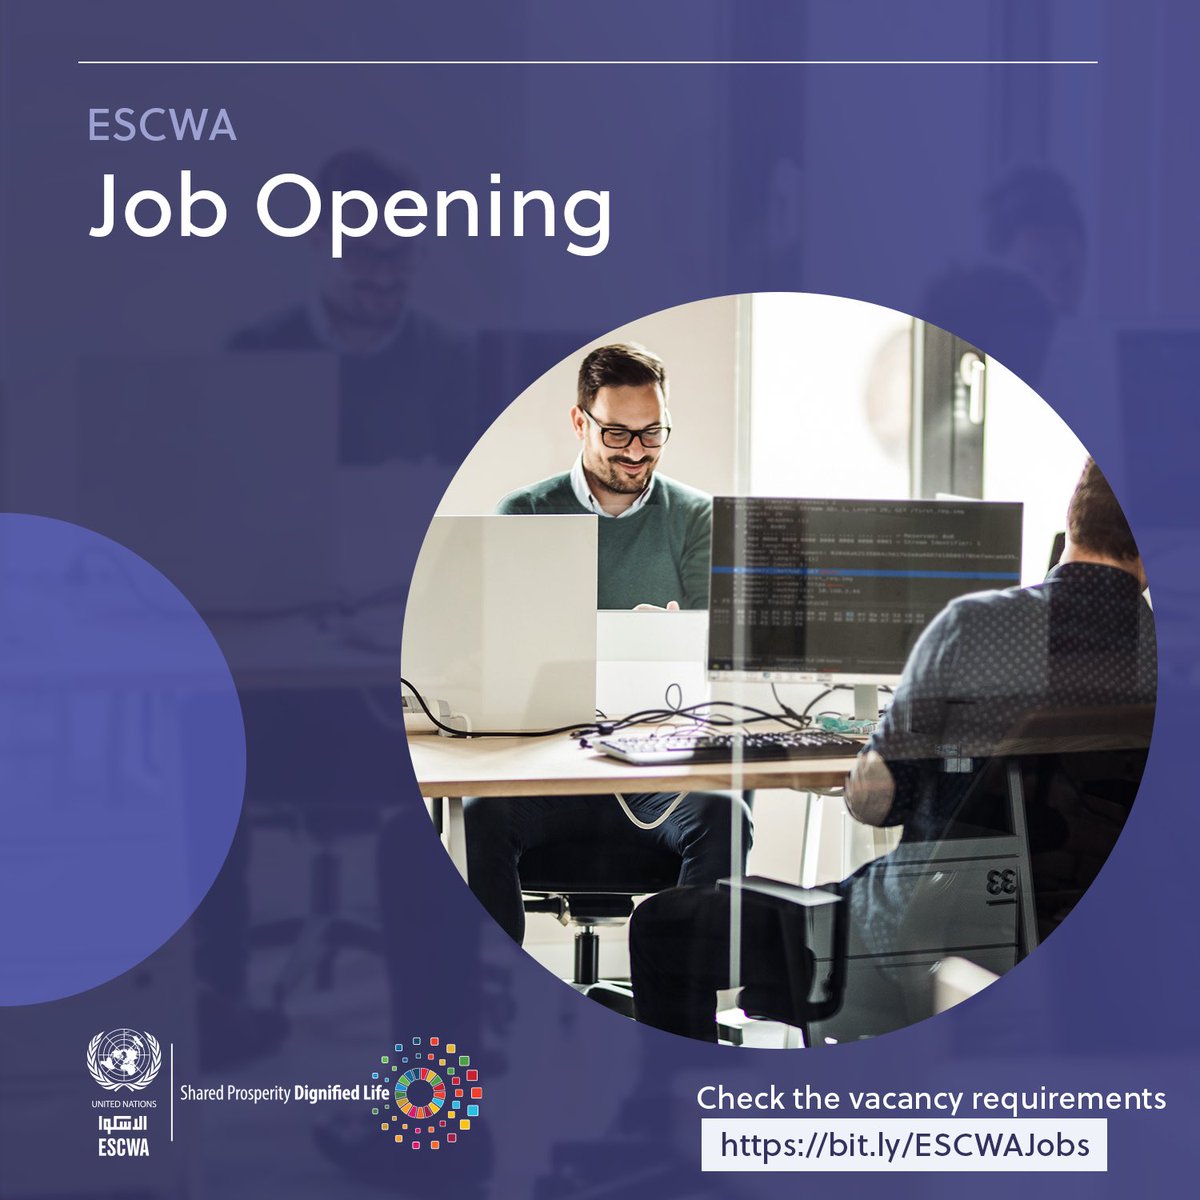 ⚠️ Vacancy announcement ⚠️ #ESCWA is hiring a Team Assistant to work with the Statistics, Information Society and Technology Cluster. If you have 2+ years of experience, apply 👉 bit.ly/ESCWAJobs by 20 May.